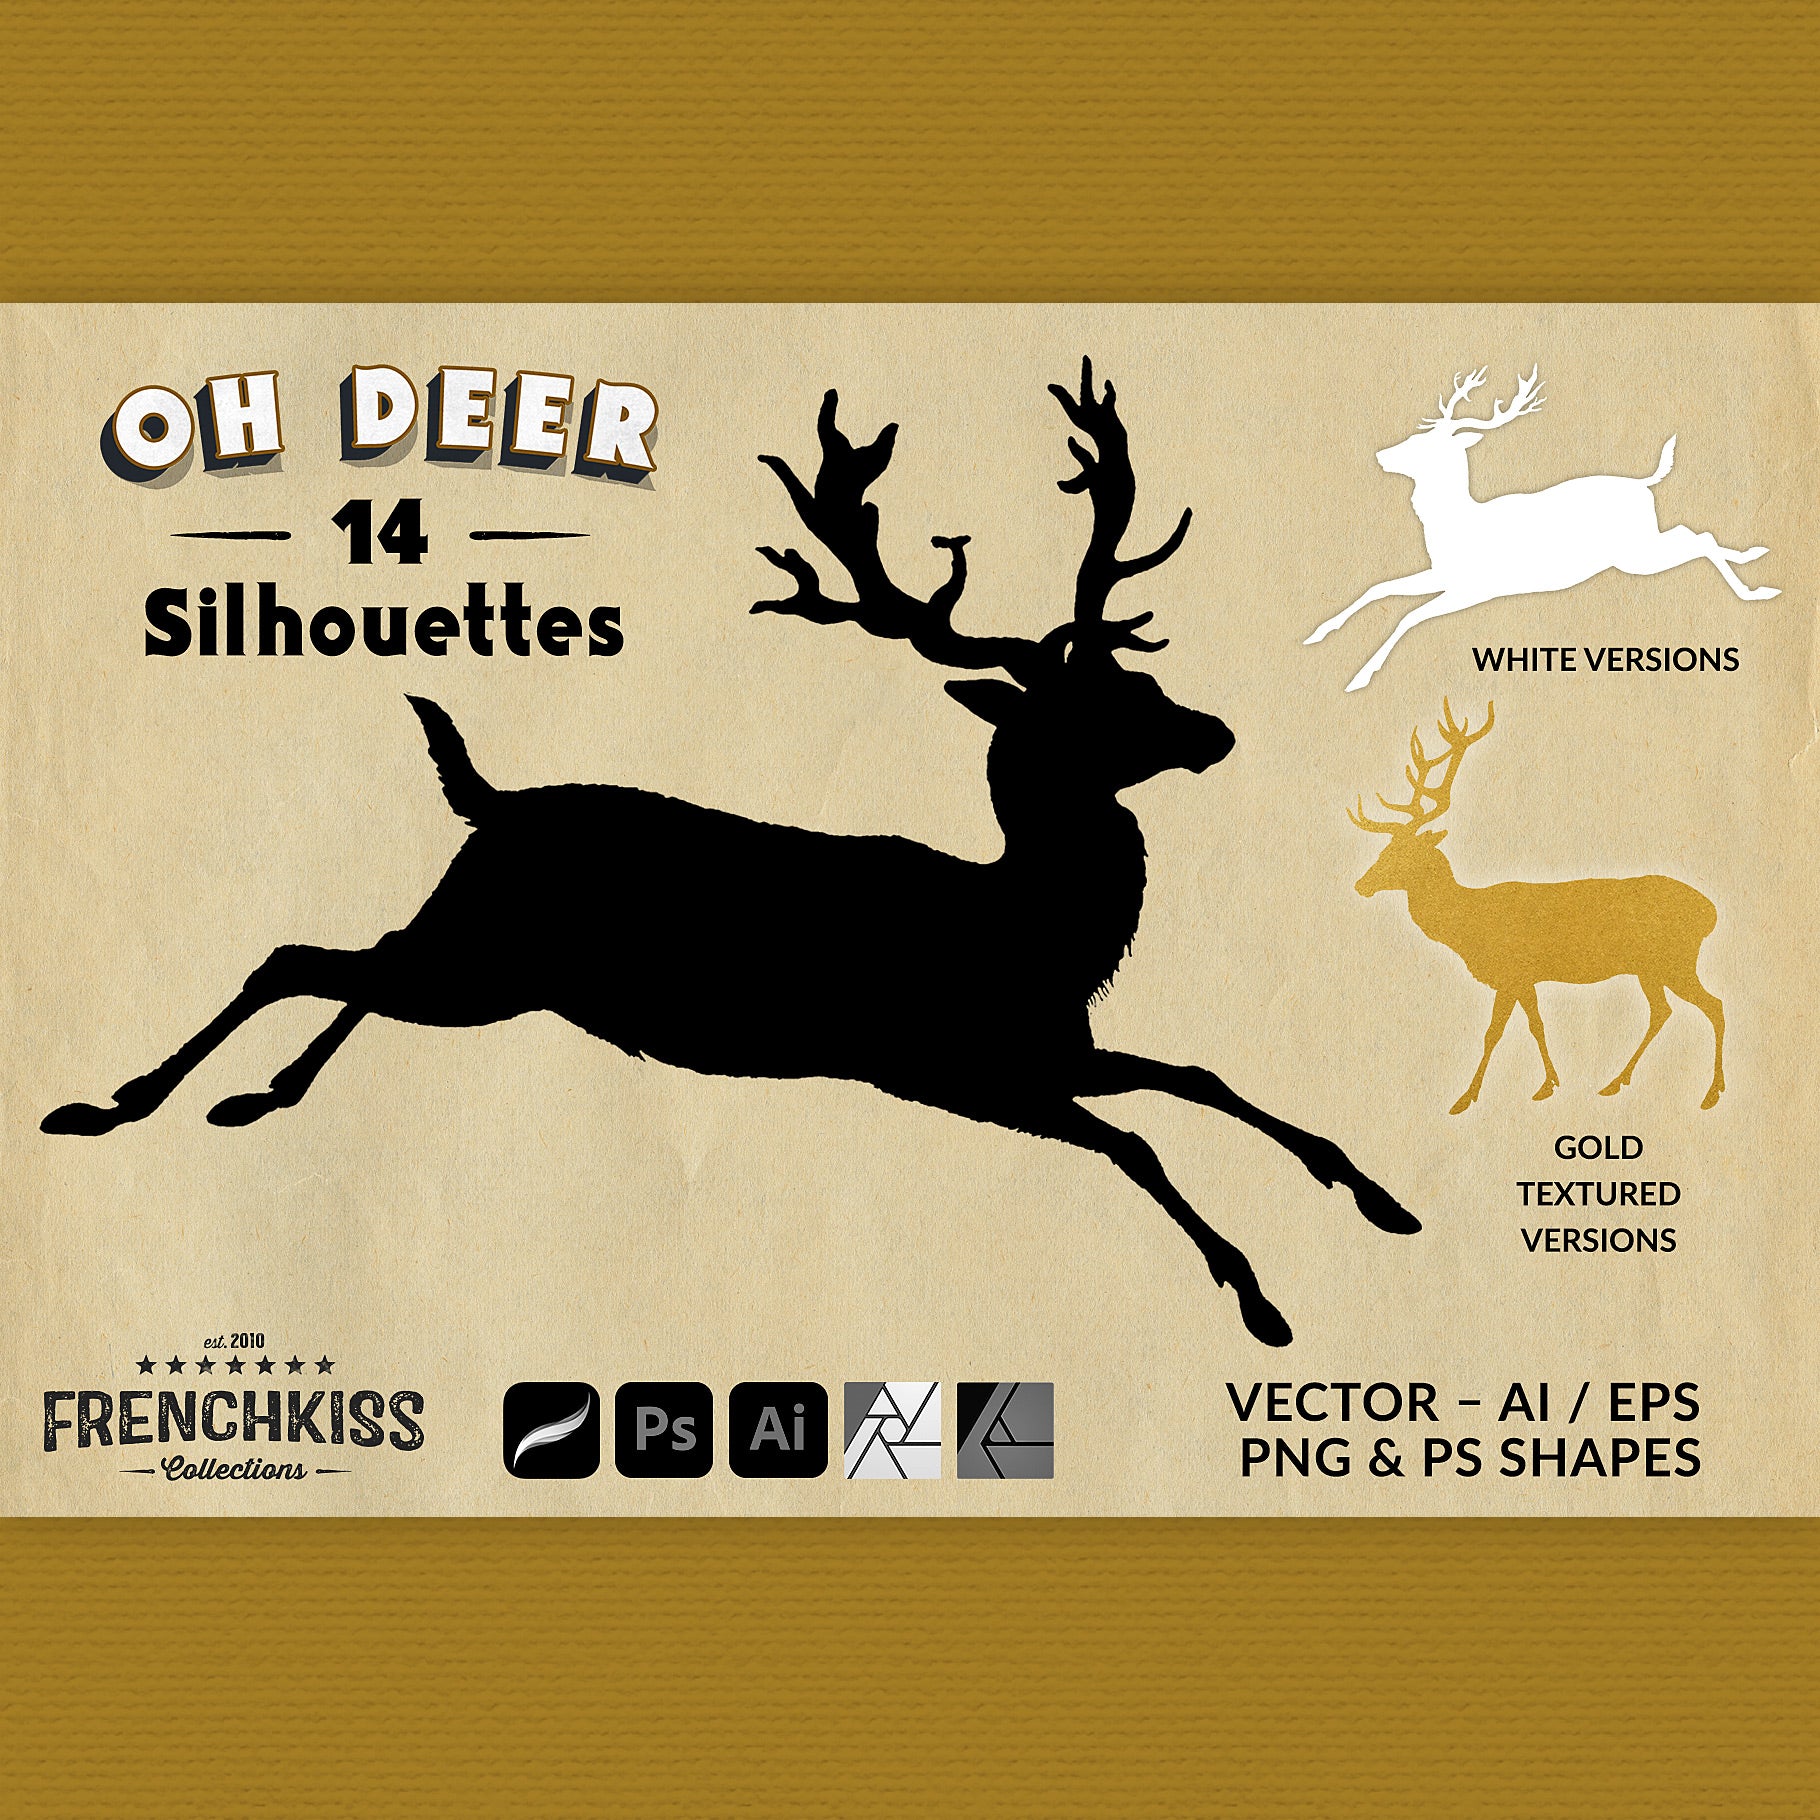 Vintage deer illustrations silhouette graphics. Vector, PNG, and PS Shapes.